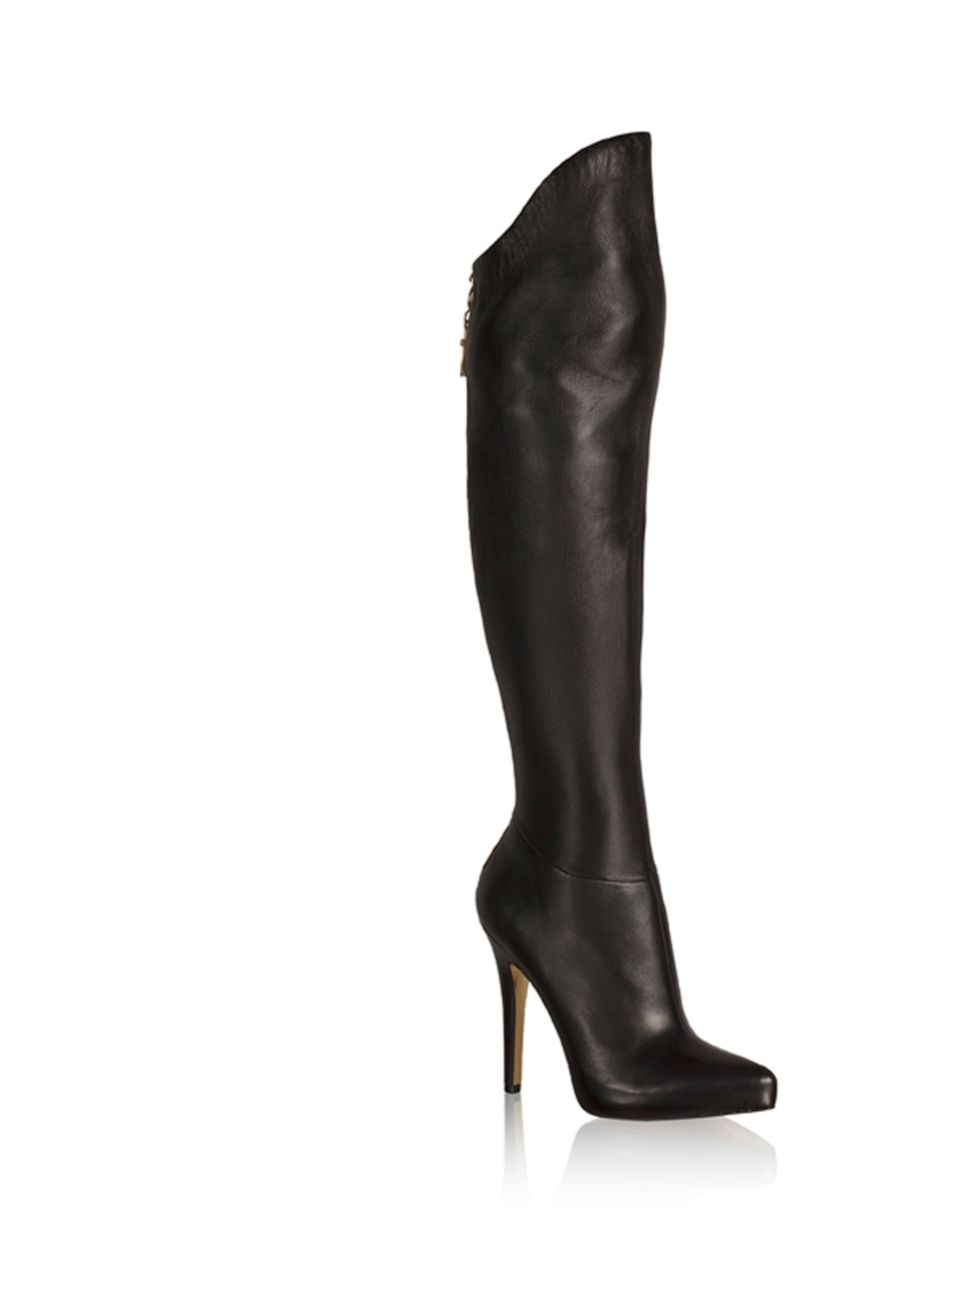 <p><a href="http://www.hm.com/gb/anna-dello-russo">ADR for H&amp;M</a> leather knee high boots, £179.99, for stockists call 0844 736 9000</p>